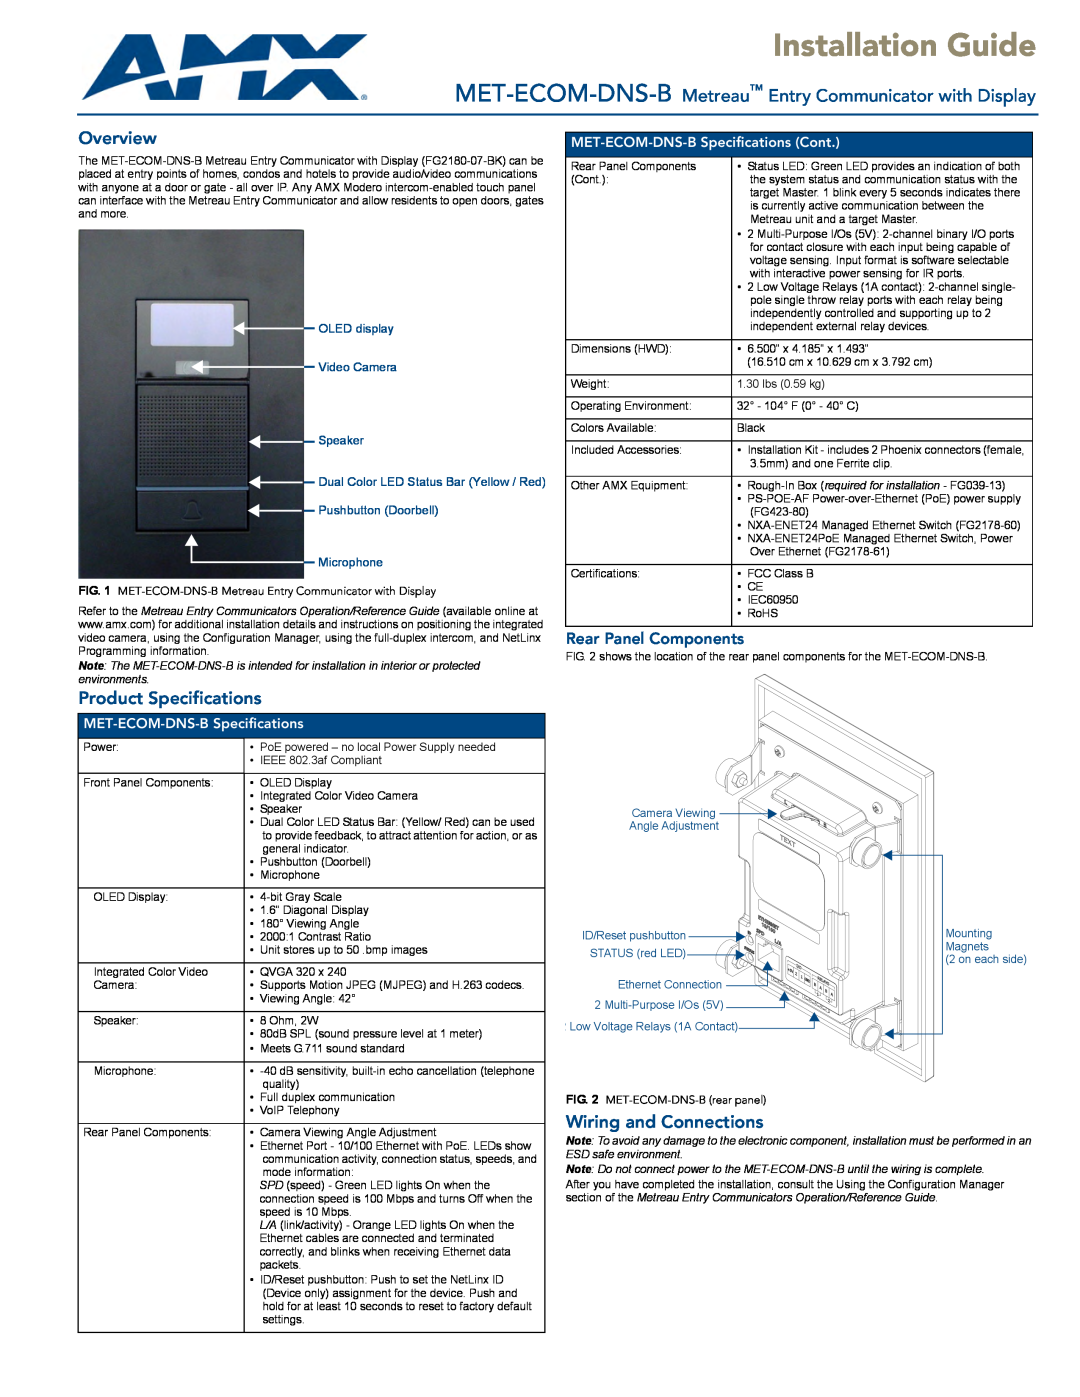 AMX MET-ECOM-DNS-B specifications Overview, Product Specifications, Wiring and Connections, Rear Panel Components 